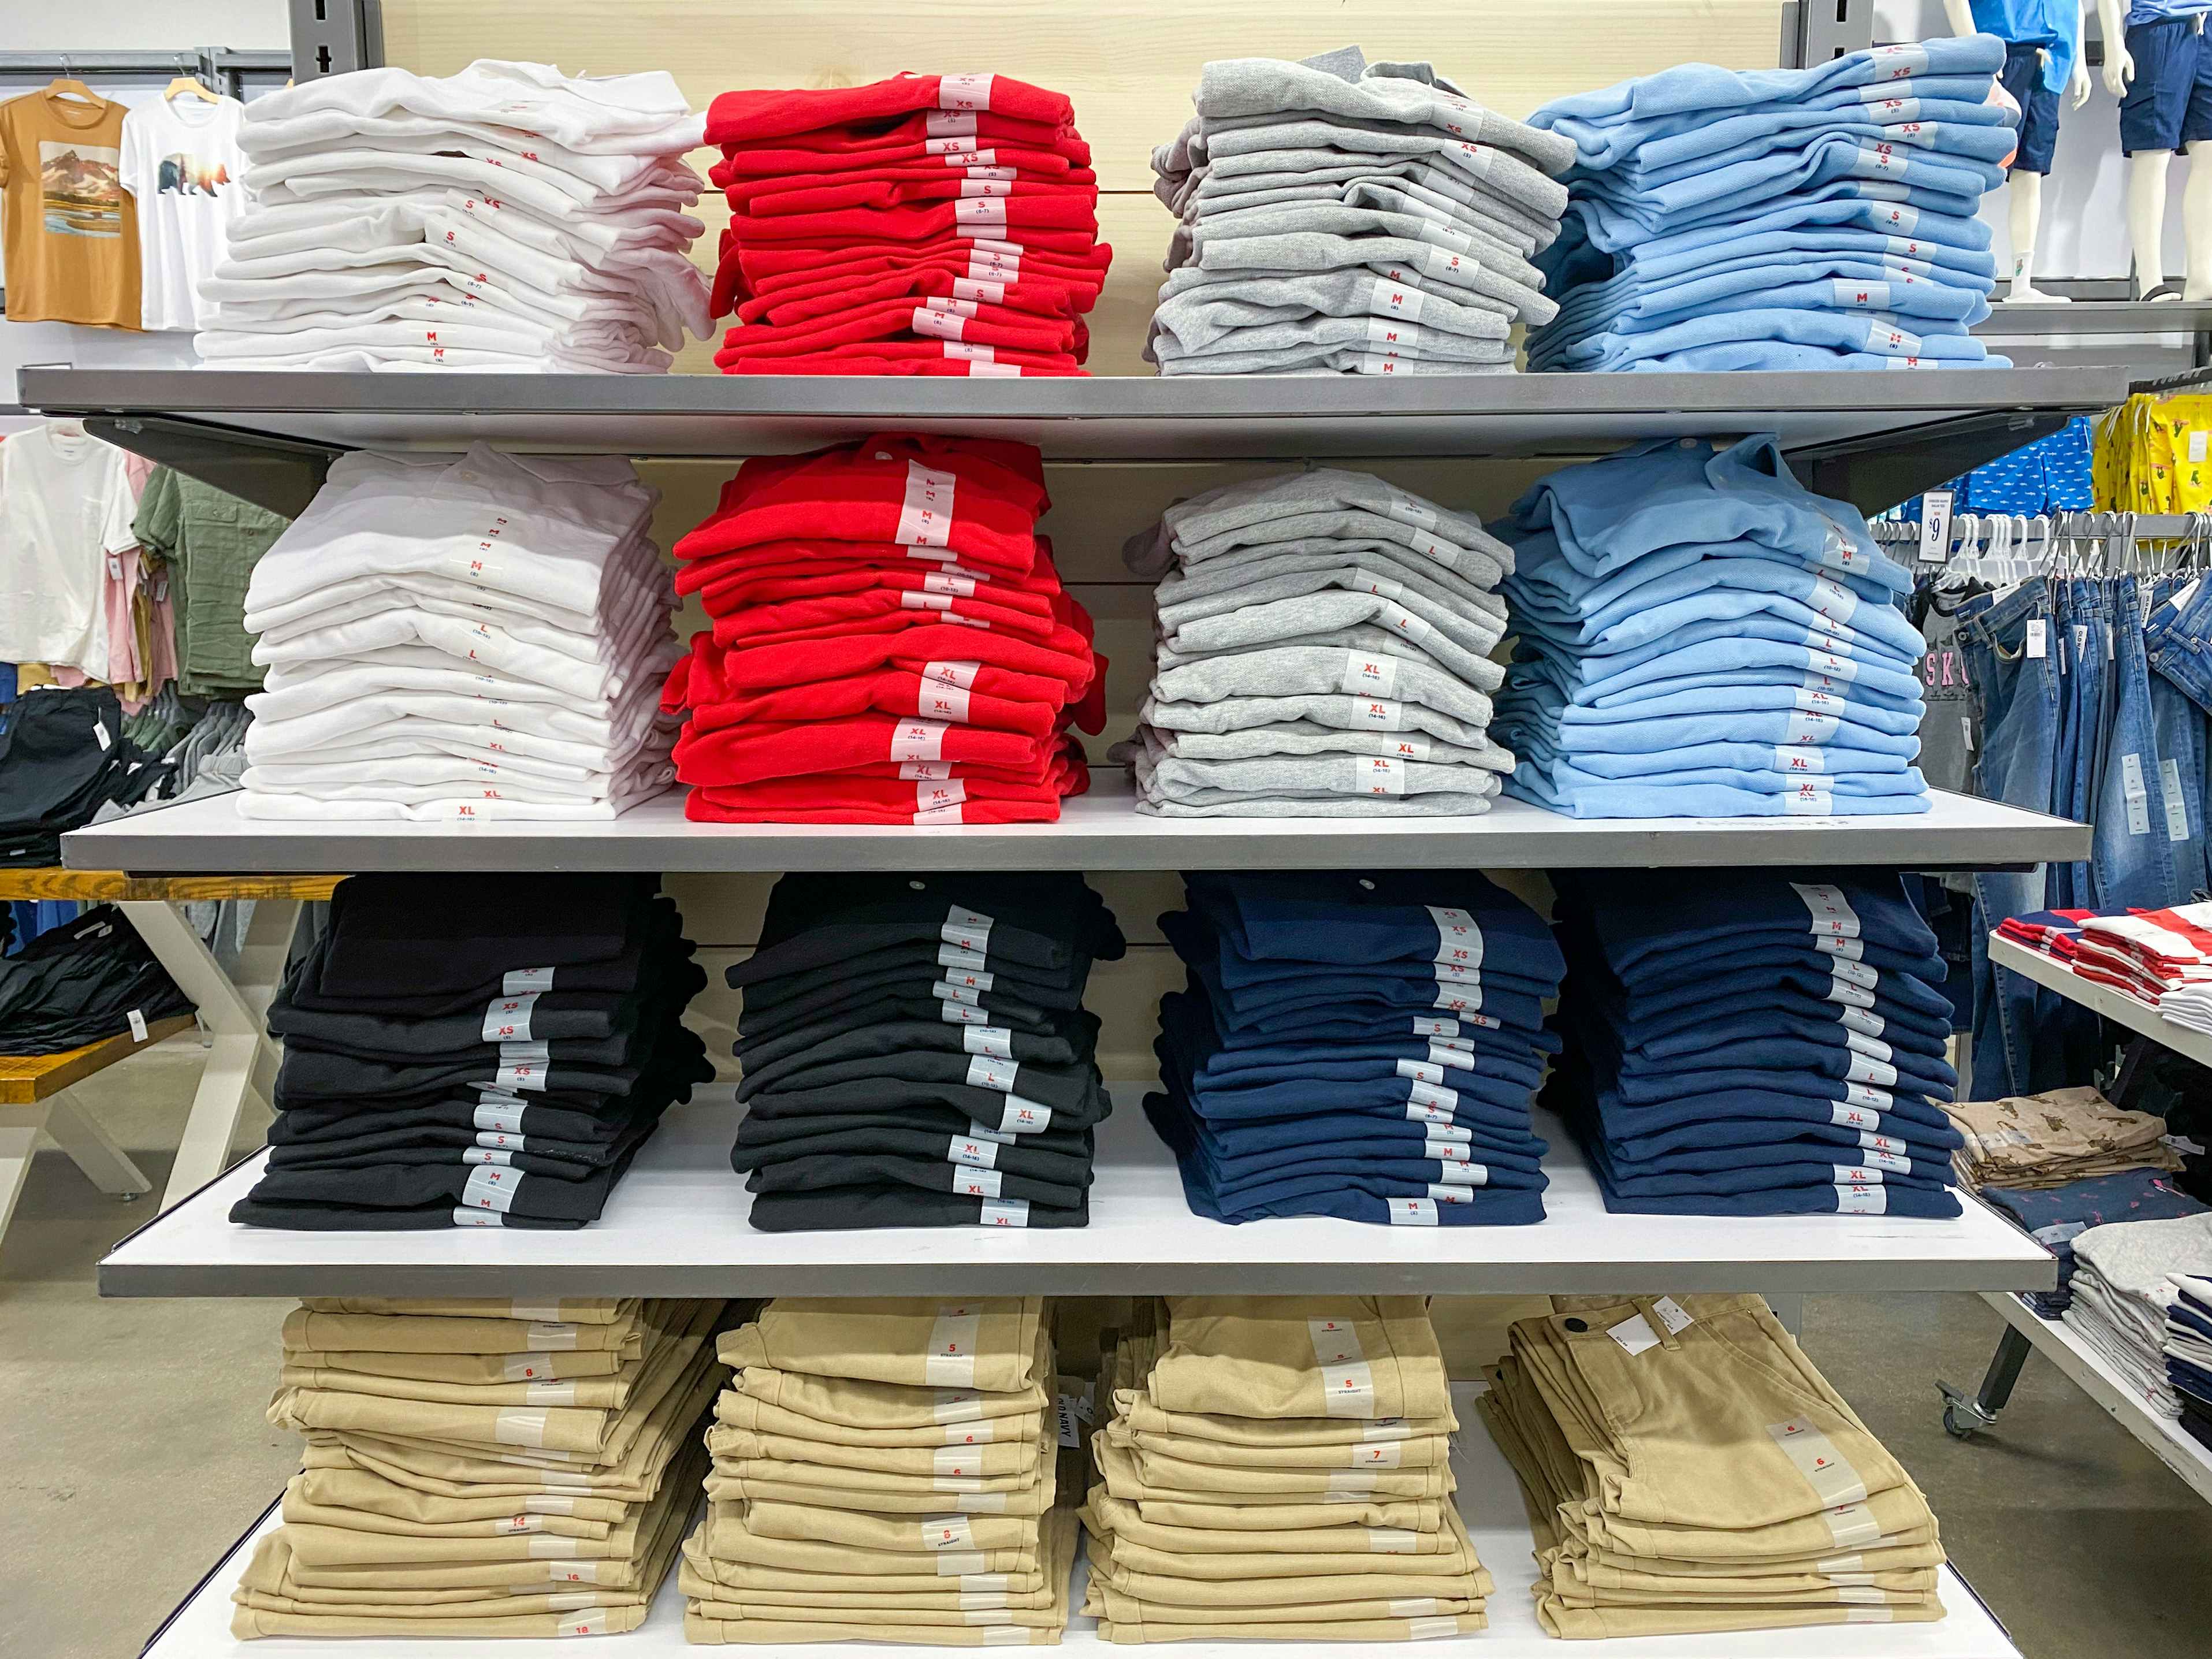 Stacks of children's school uniform polo shirts and pants on shelves at Old Navy.